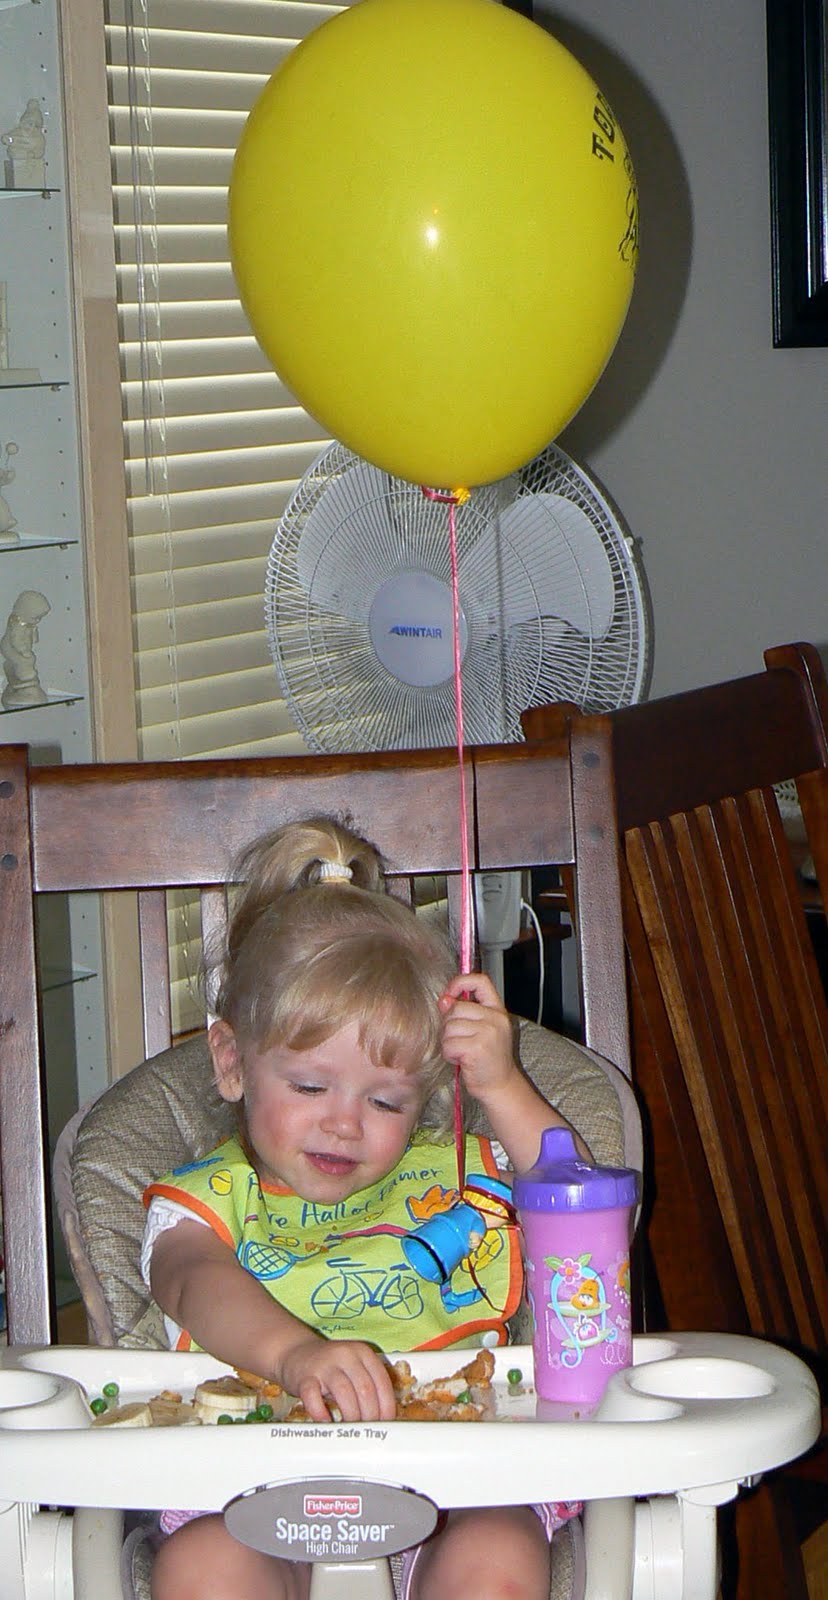 [LeAnne+and+her+Yellow+Balloon_eating+lunch.jpg]